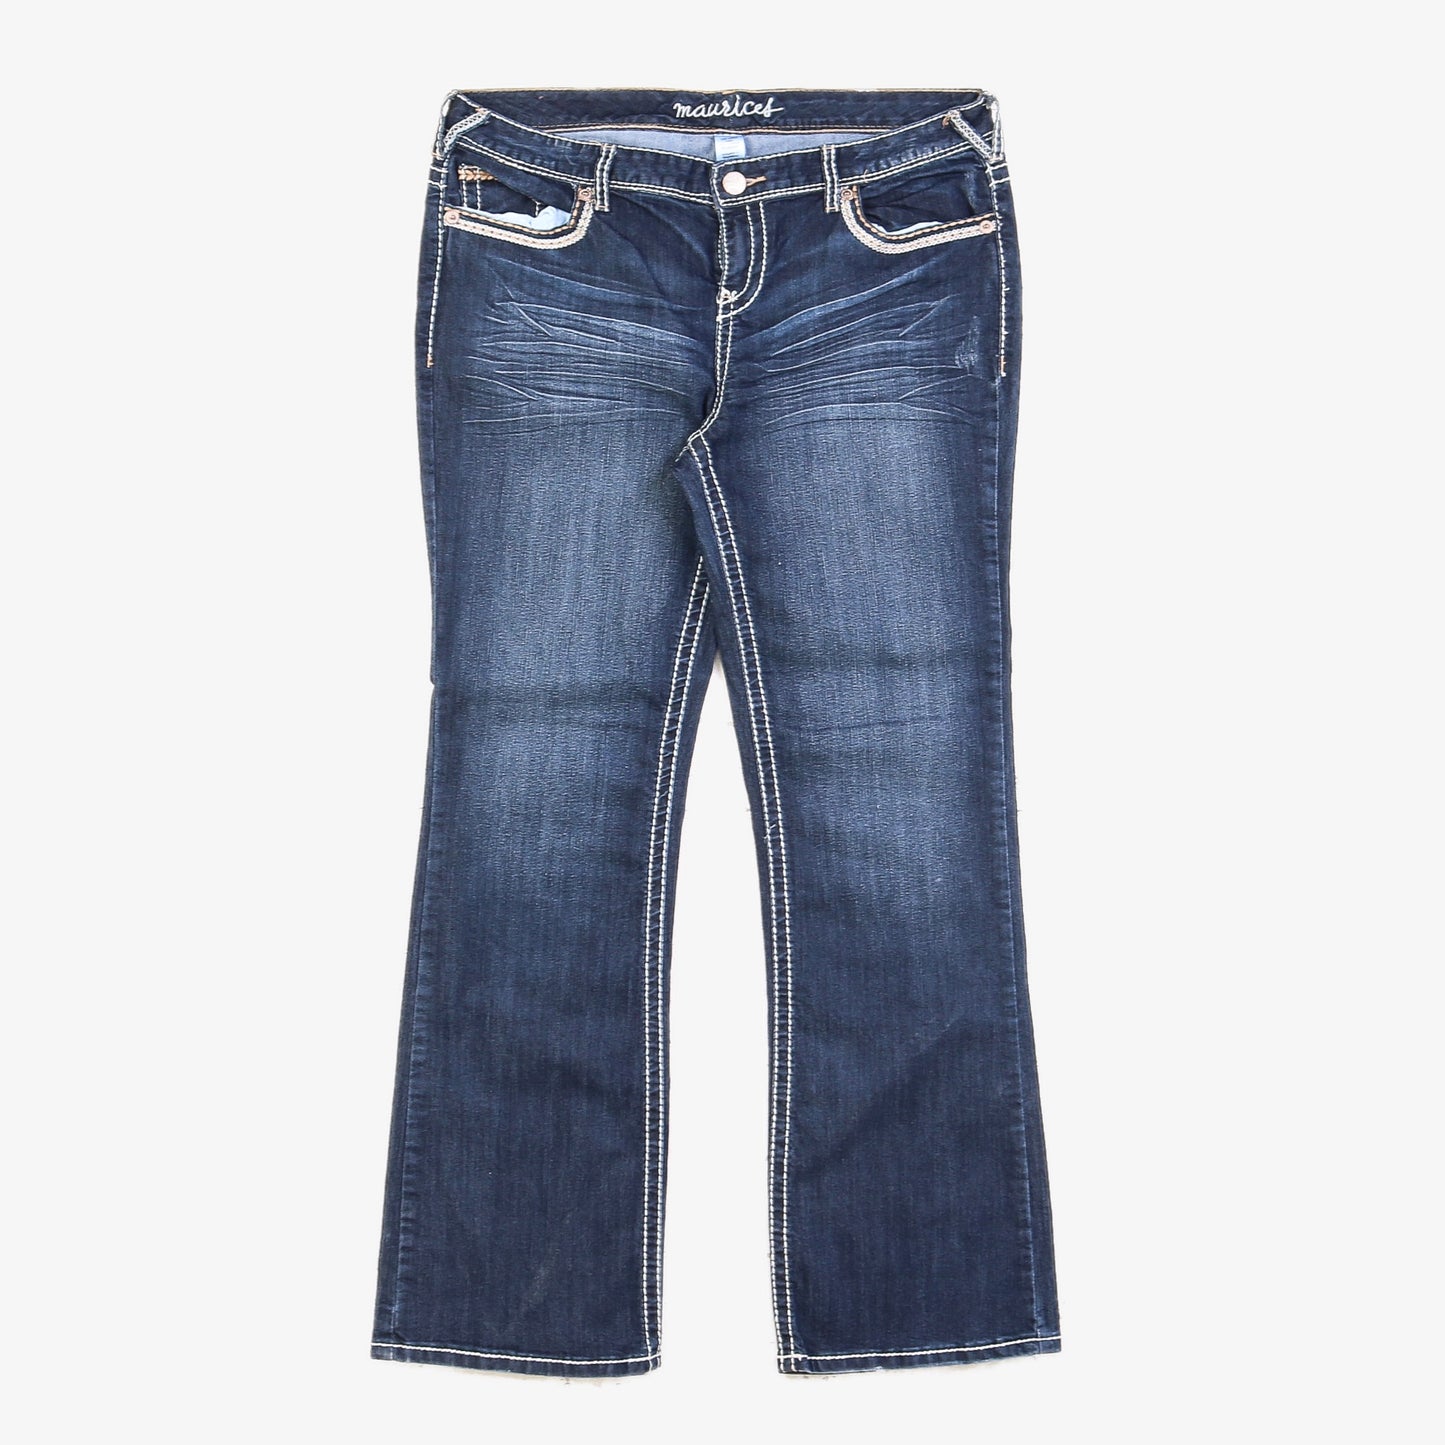 Maurices Jeans - Women's 16 - American Madness